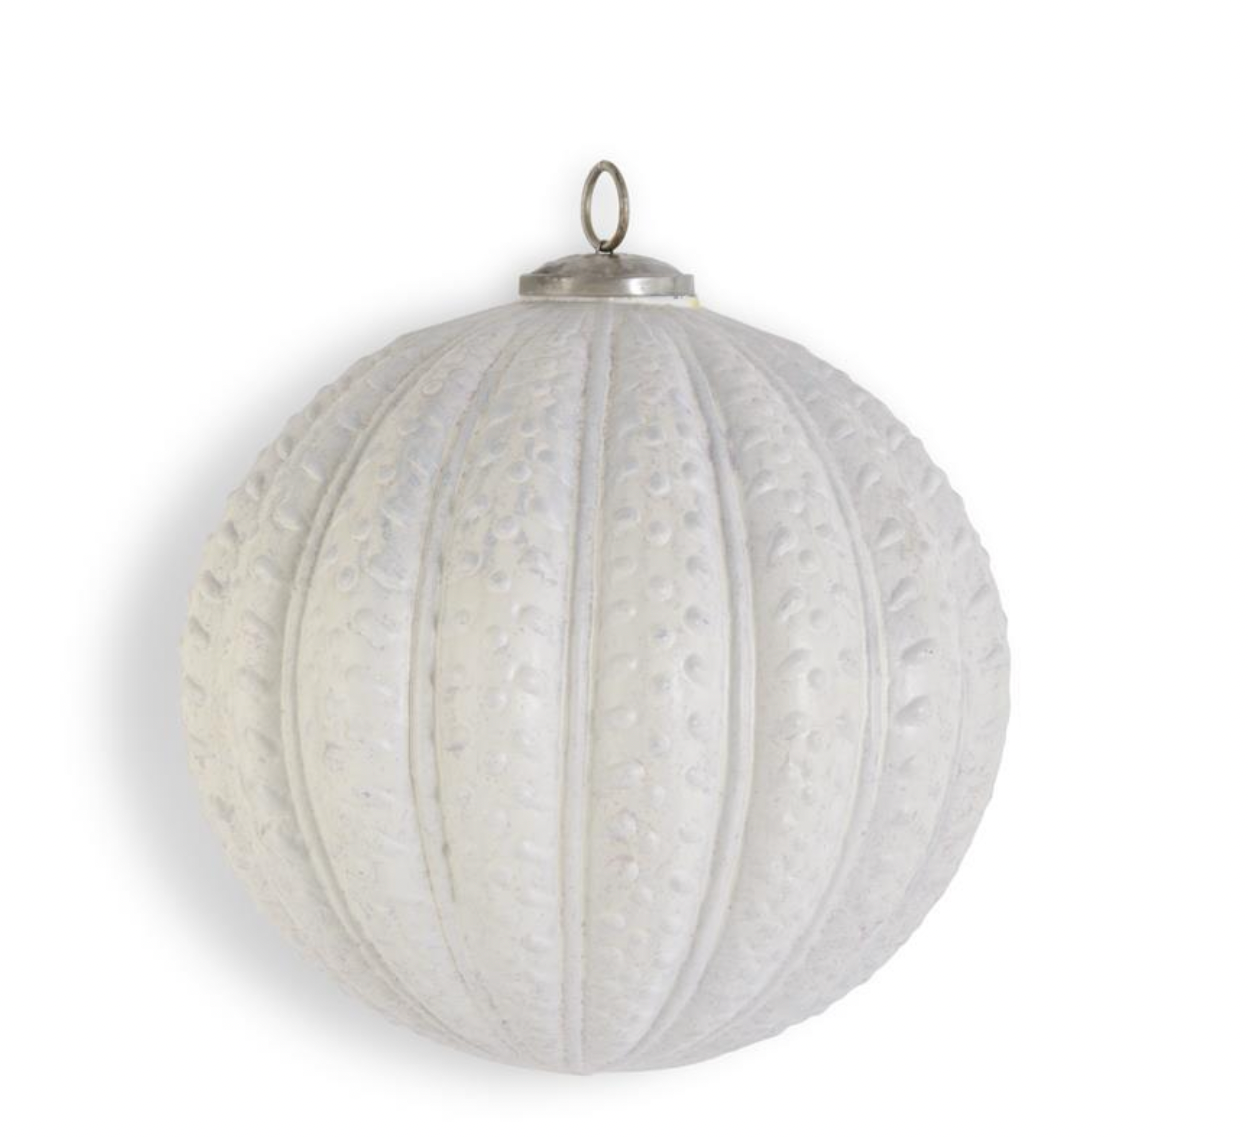 Distressed White Glass Embossed Ball Ornament